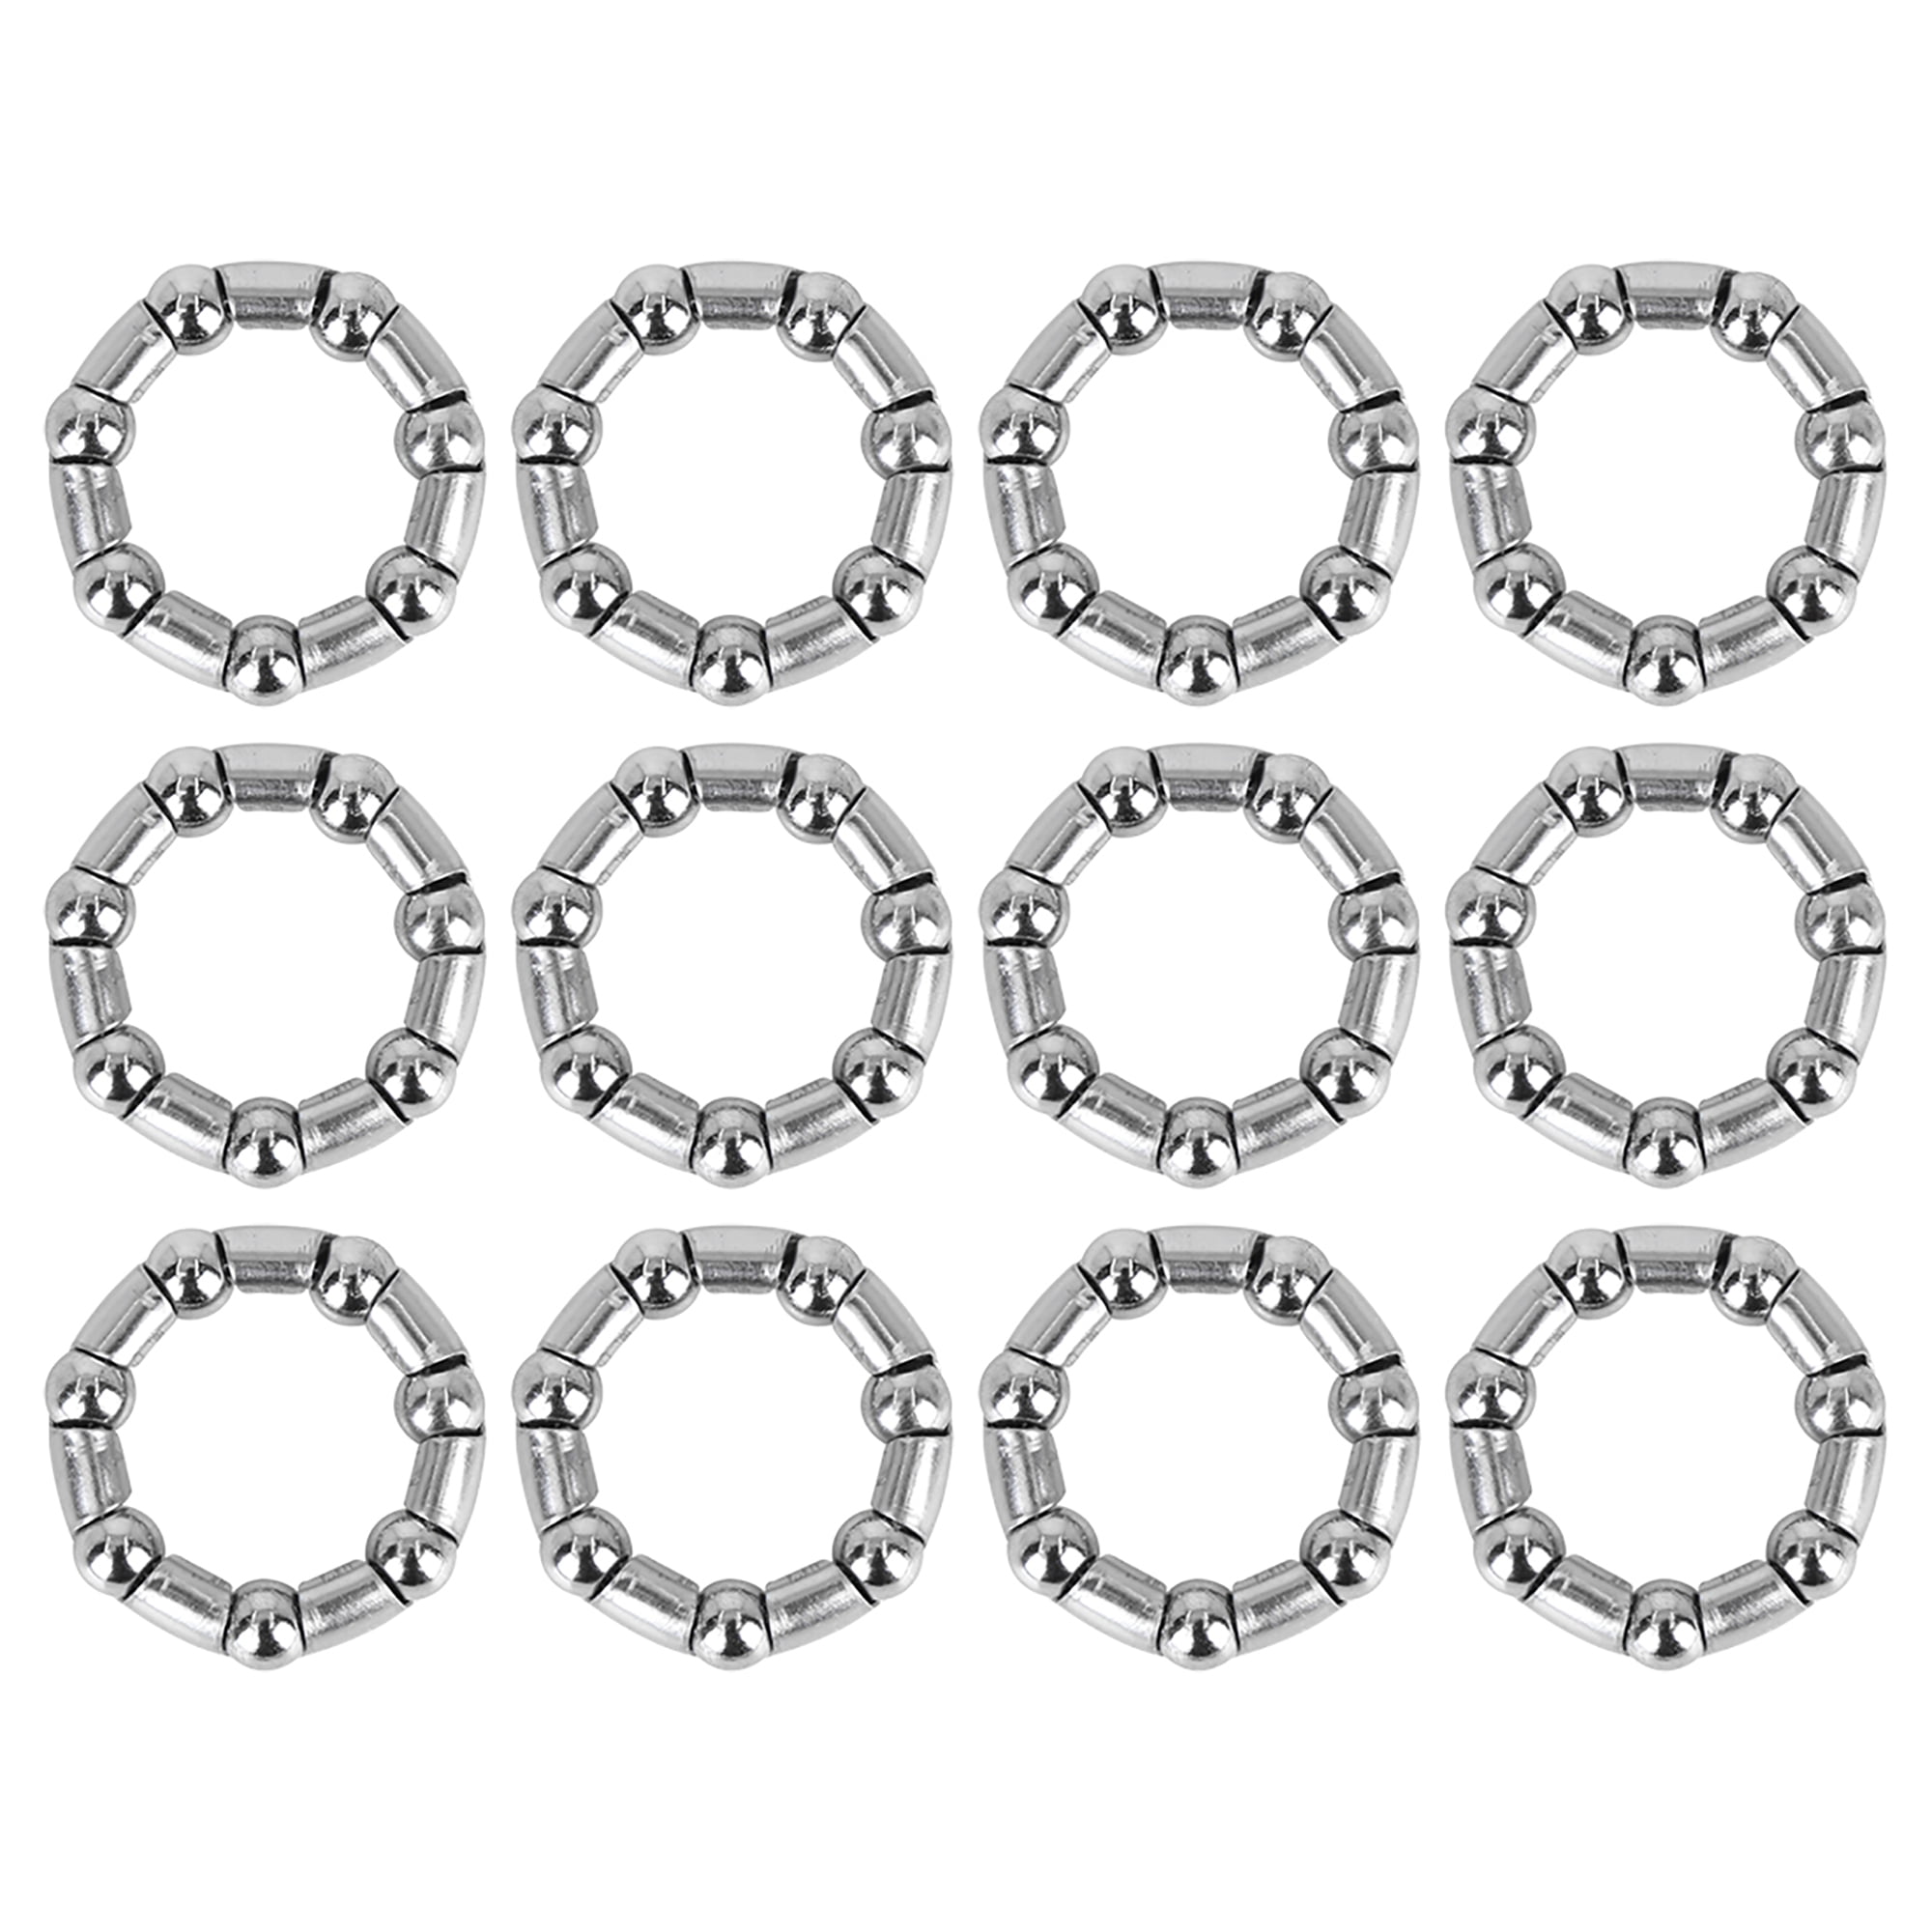 X AUTOHAUX 12pcs 37mm x 7 Ball Bearing Cages Crank Bearings Wheel Bearing Retainer for Bicycle 